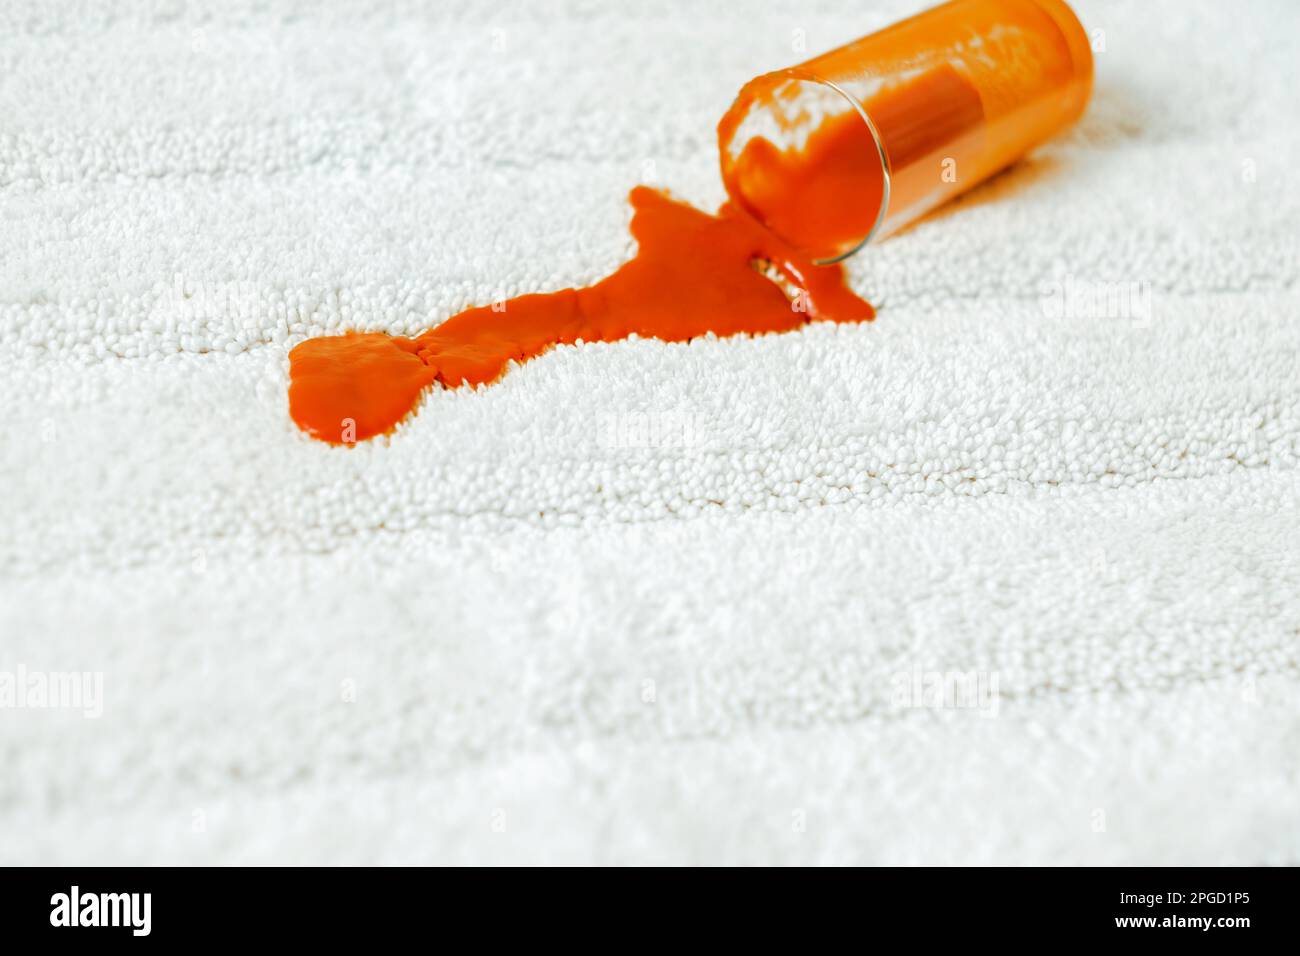 Spilling red juice a glass on a white carpet indoors. closeup. daily life stain concept Stock Photo